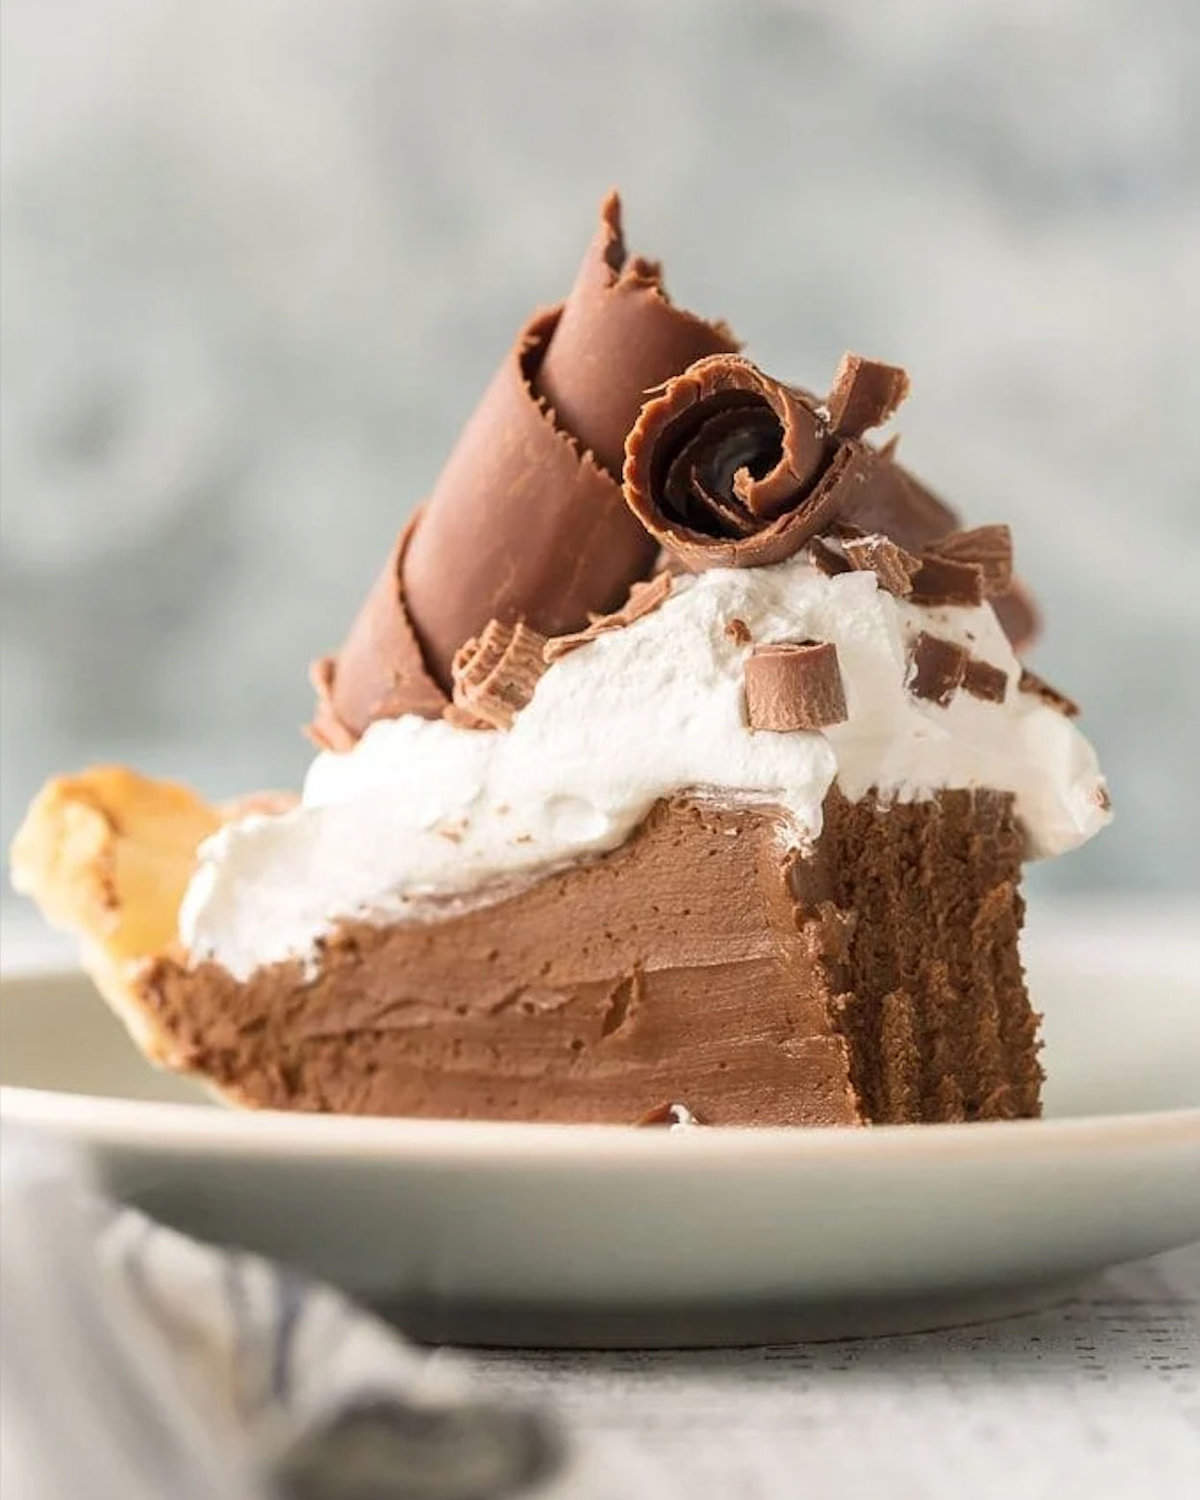 A slice of French silk pie on a white plate.